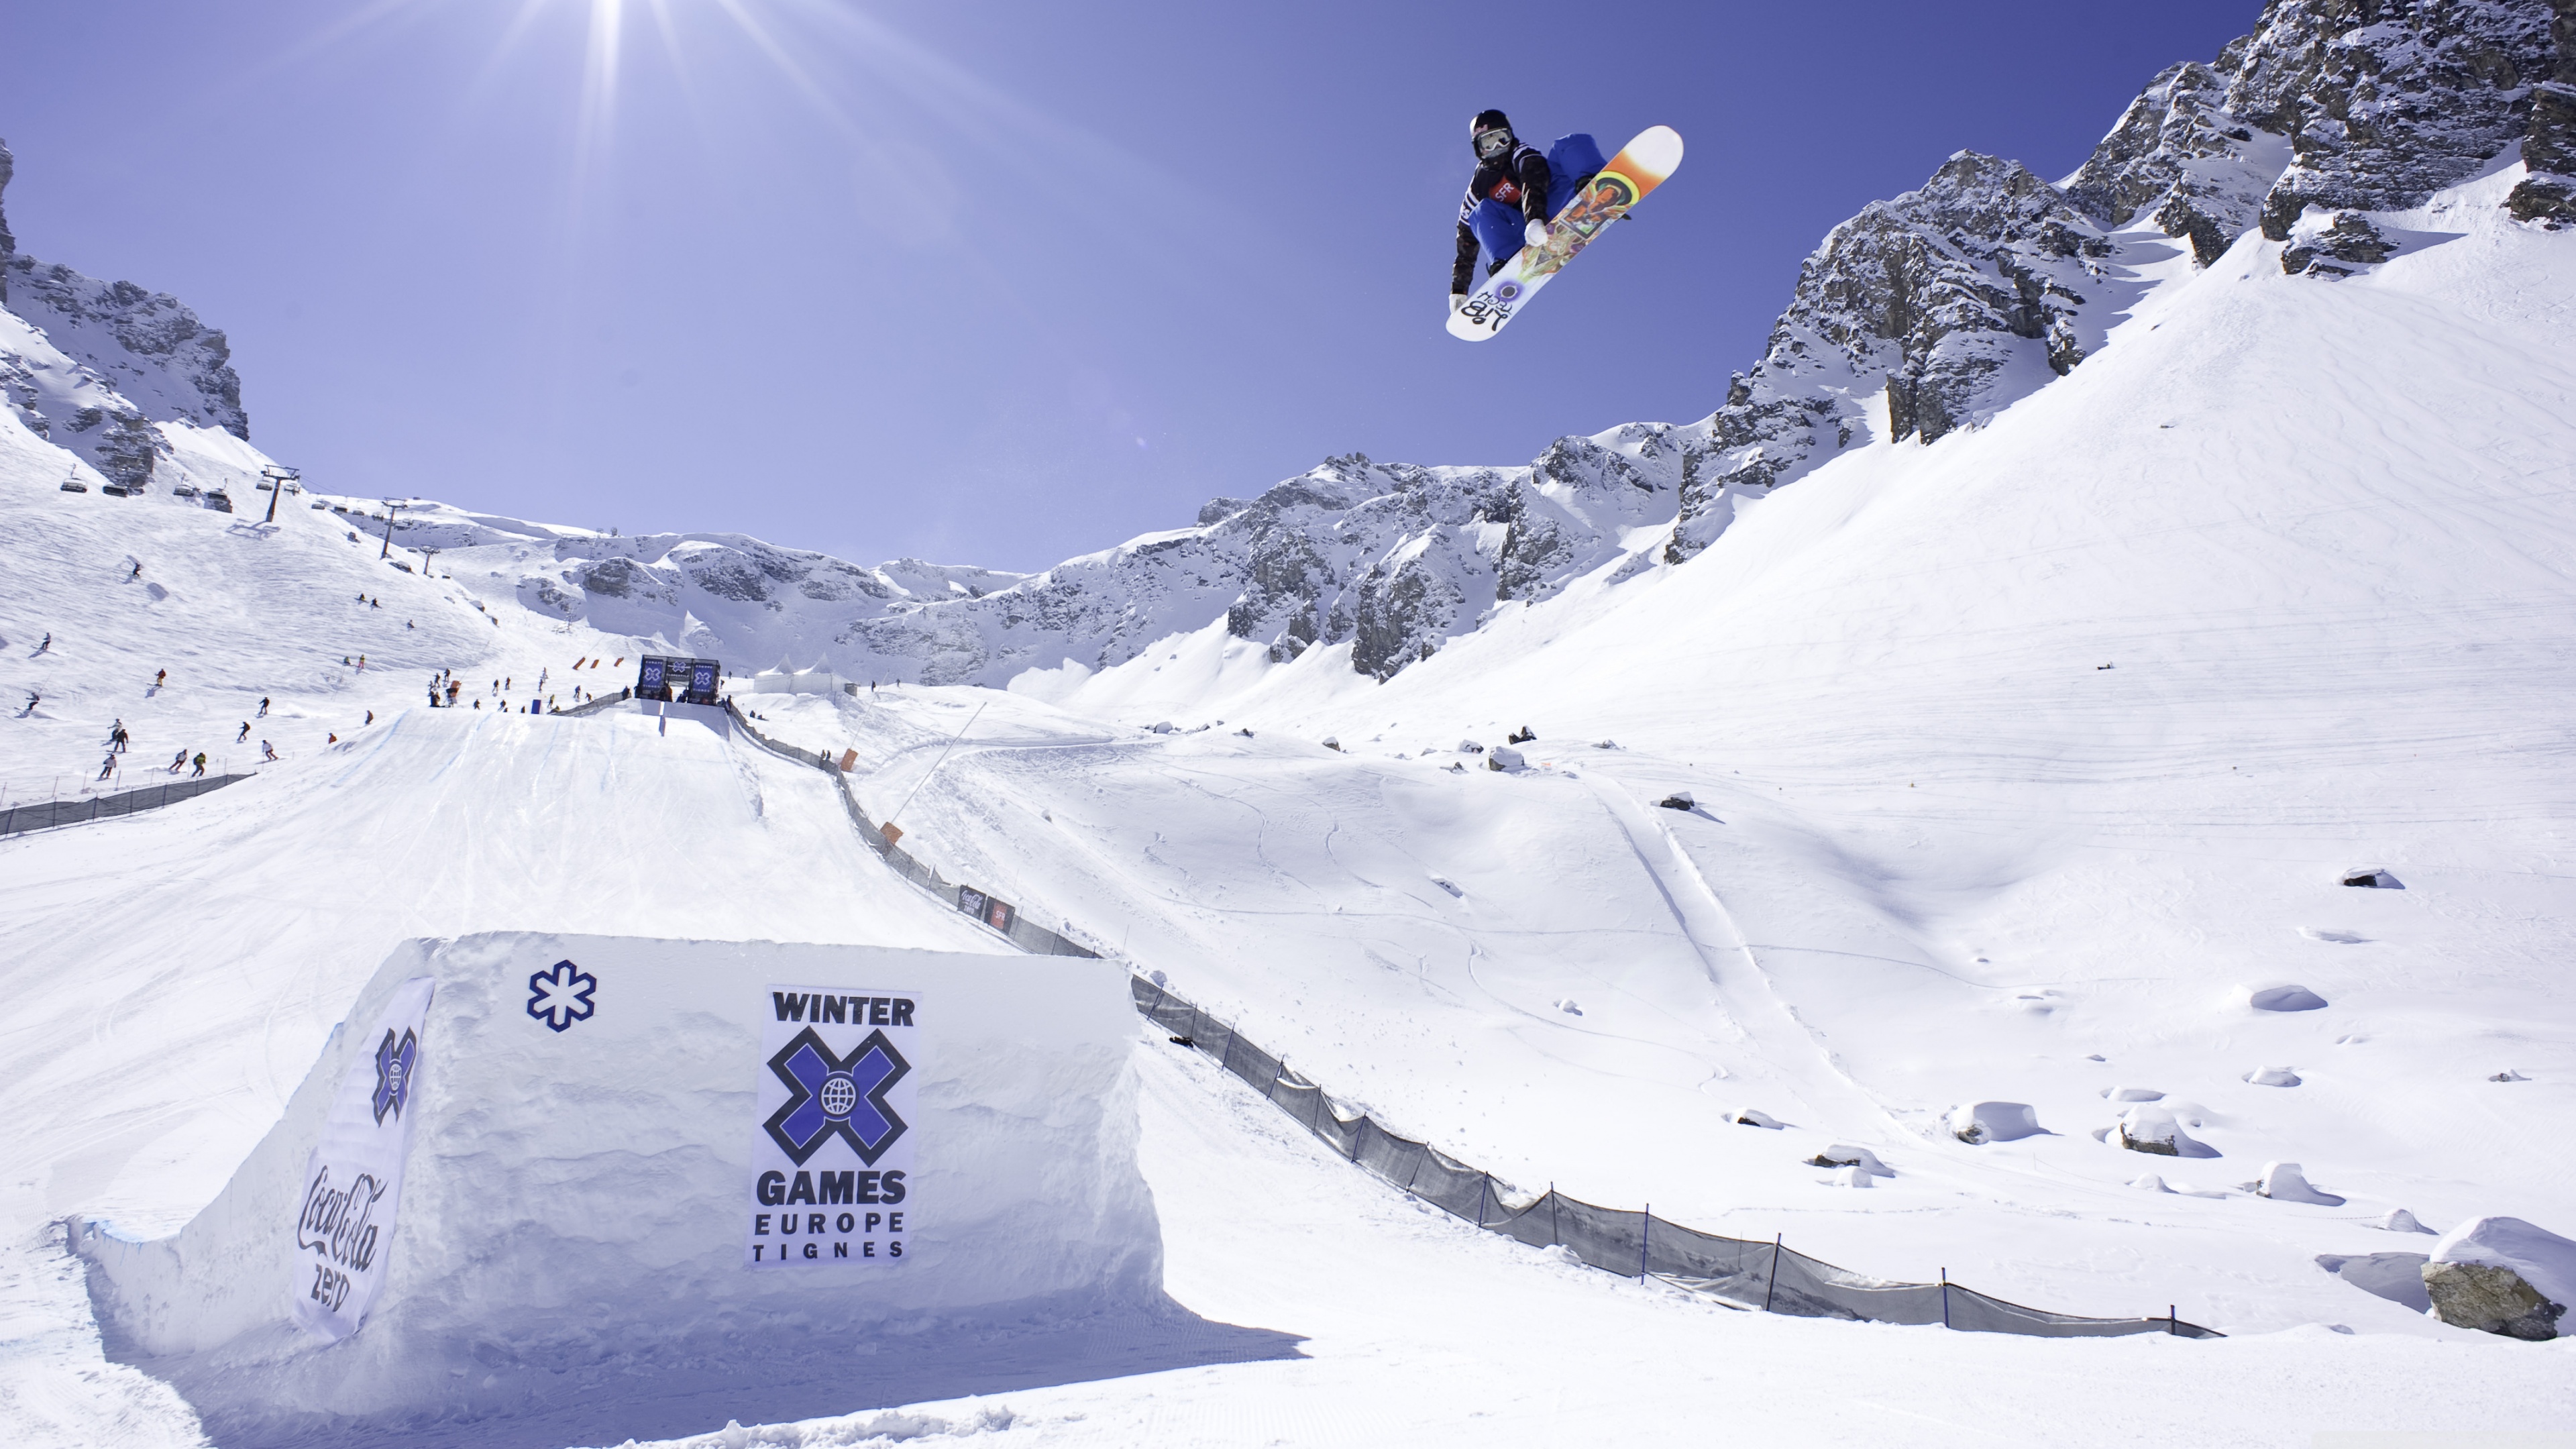 Snowboarding Hd Wallpapers